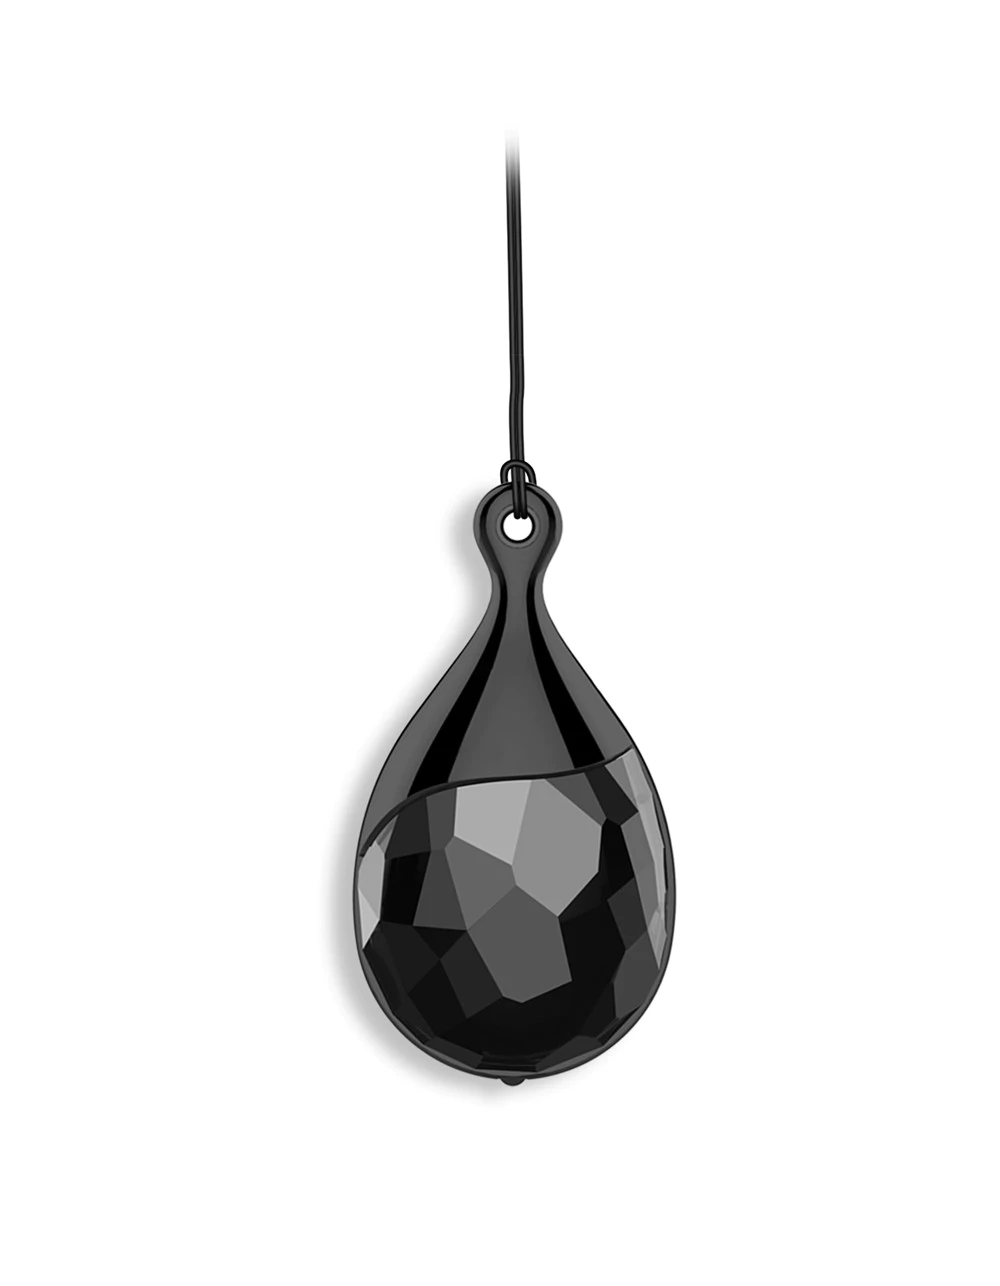 32GB Hidden Spy Pendant Long Time Recorder with UV Lamp